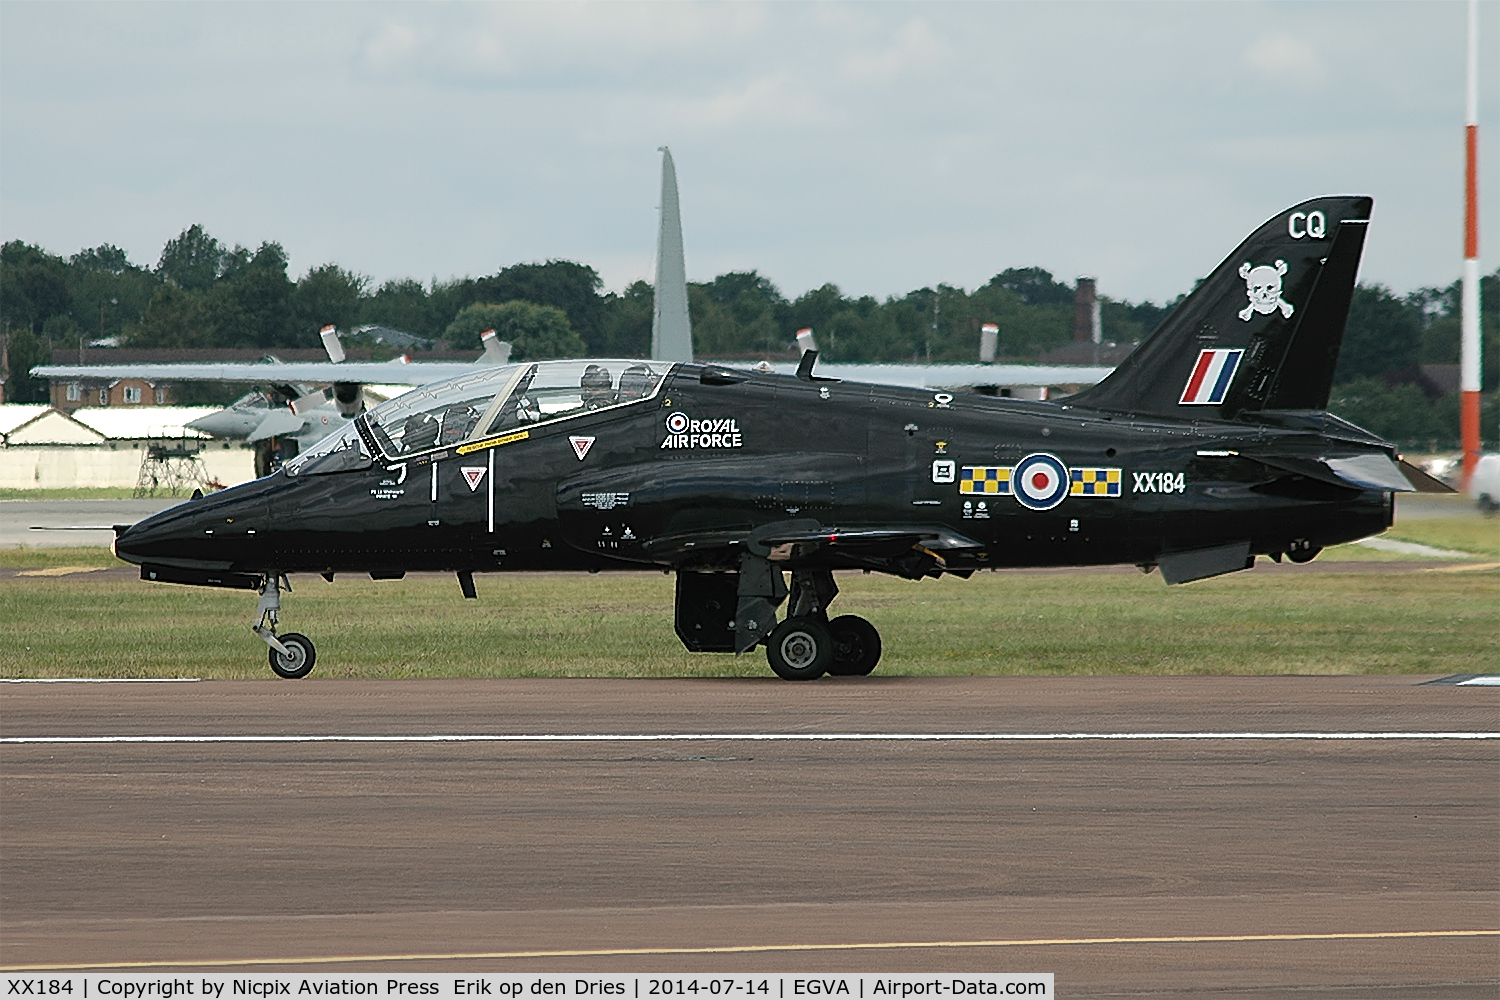 XX184, 1977 Hawker Siddeley Hawk T.1 C/N 031/312031, XX184 is a Hawk T.1A of the inventory of no. 100 sqn, RAF.